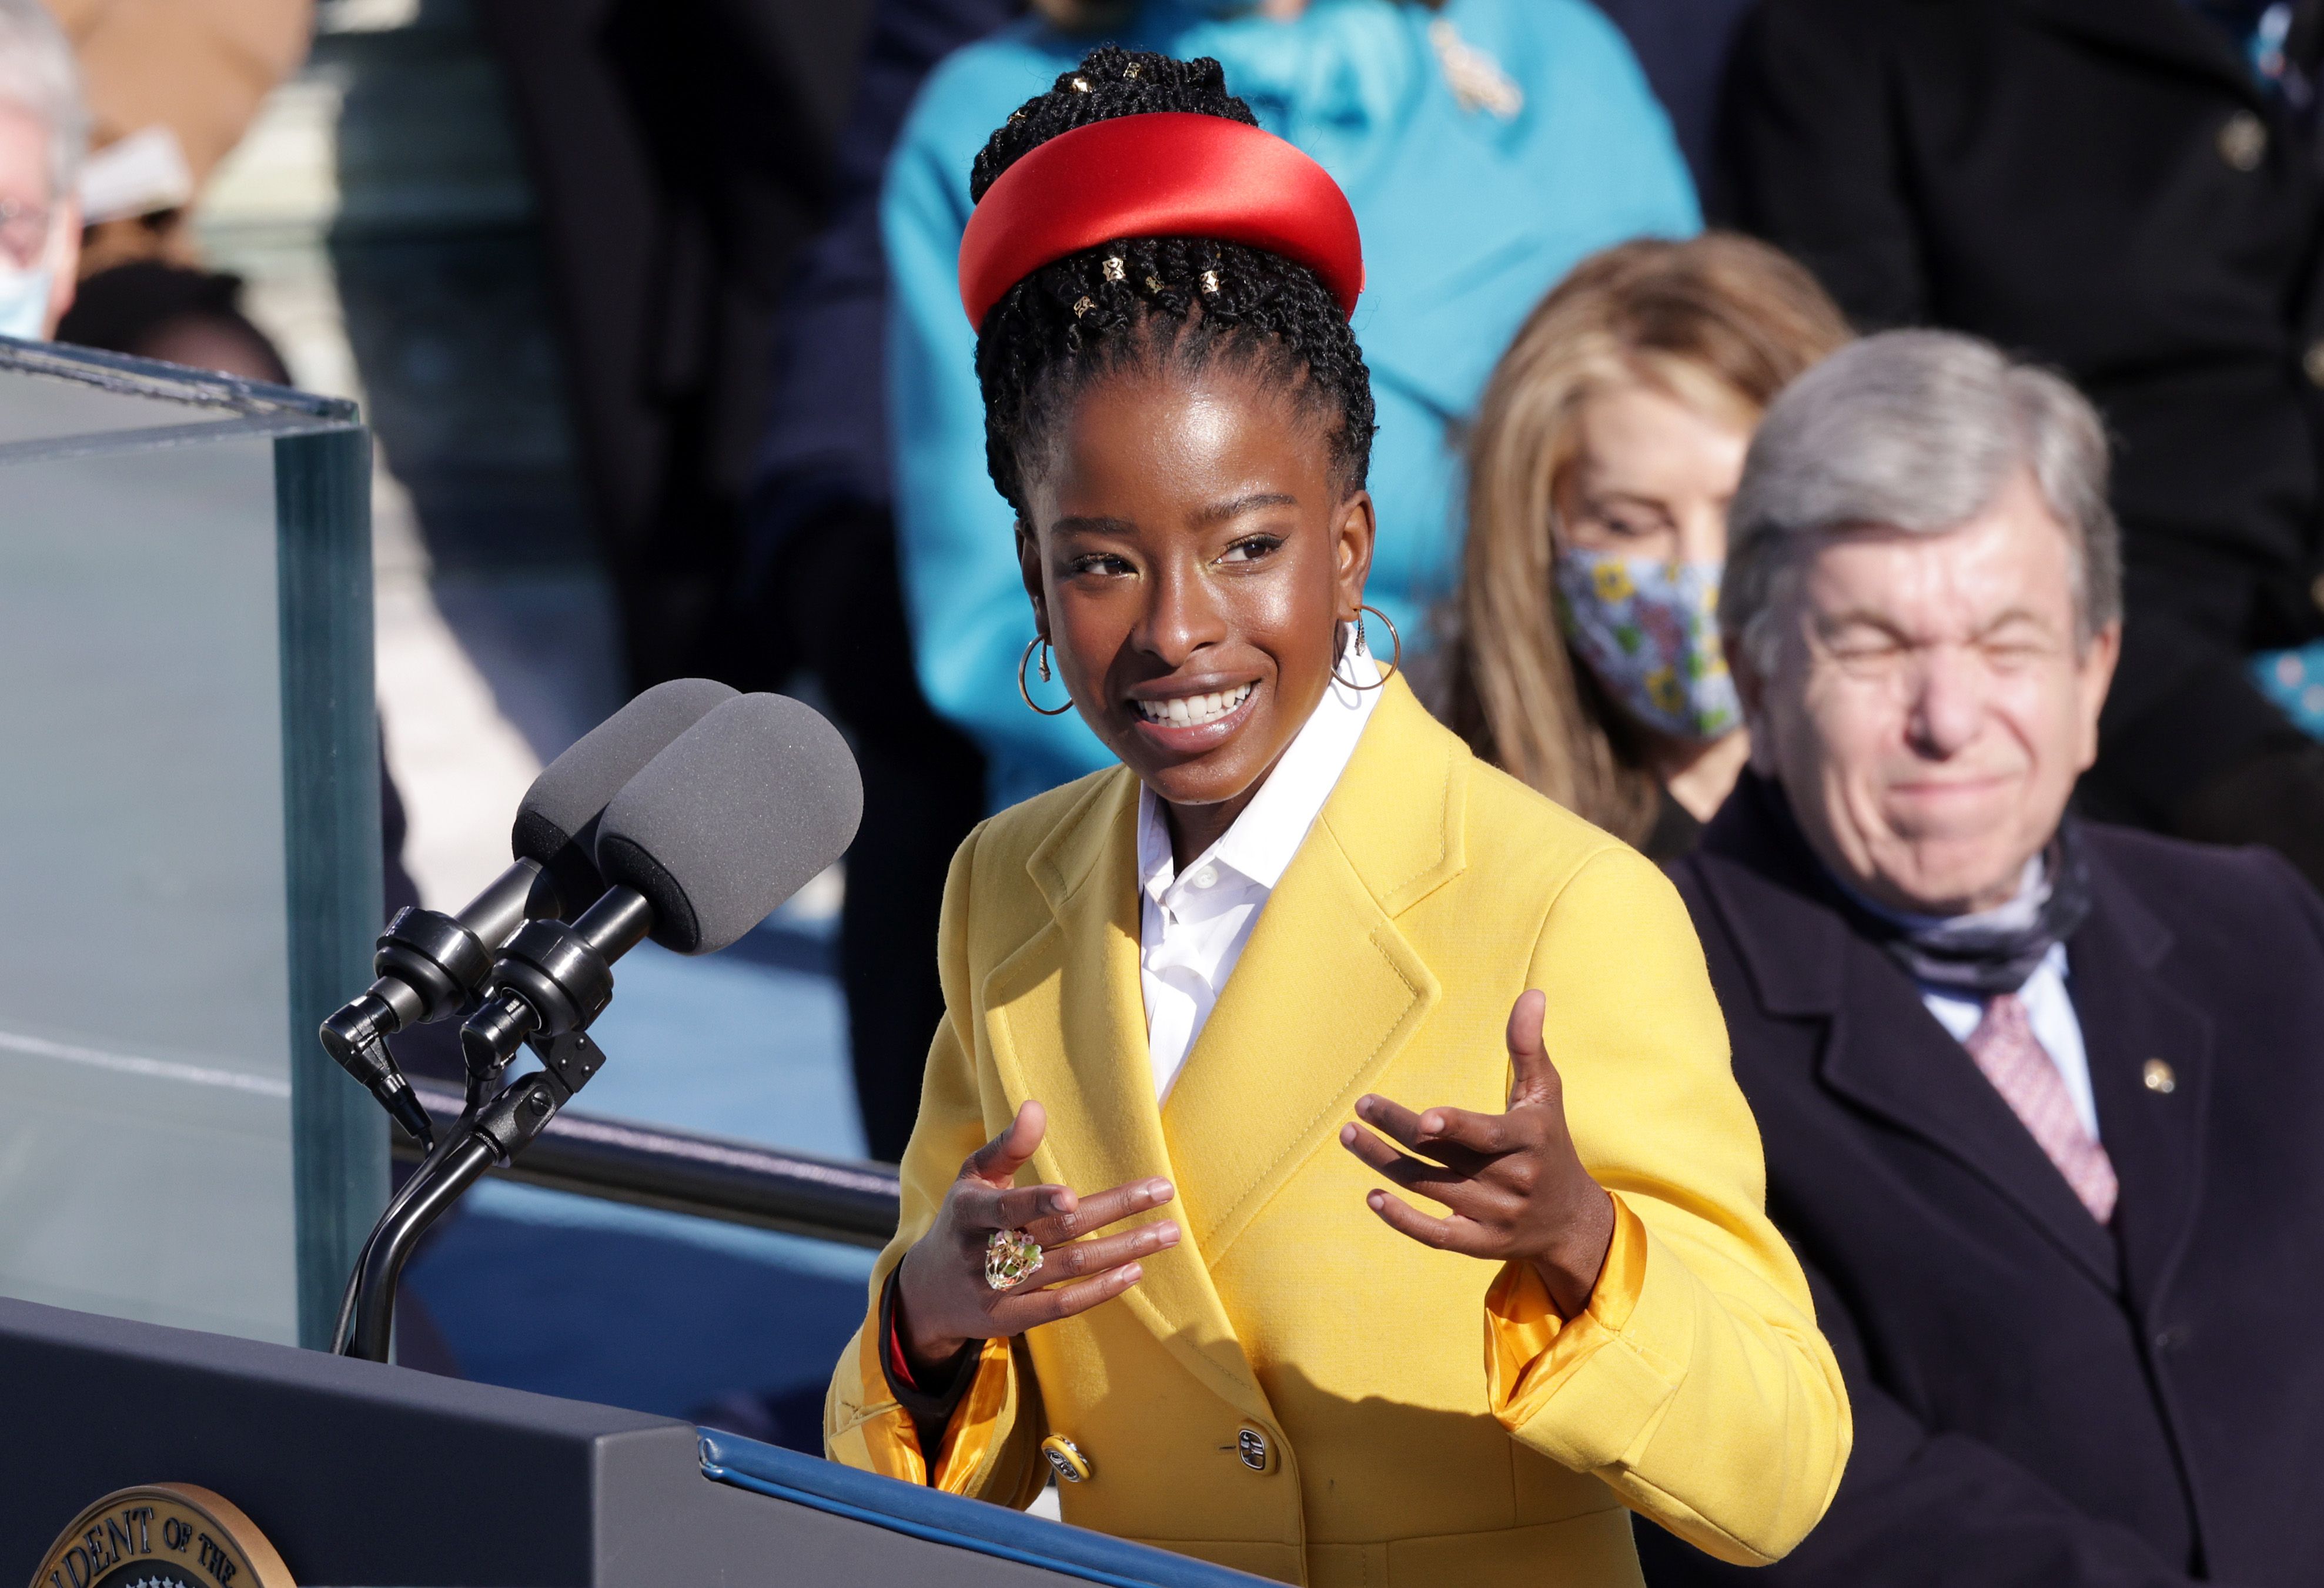 Amanda Gorman speaks during the inauguration of US President Joe Biden at the US Capitol on January 20, 2021. | Photo: Getty Images